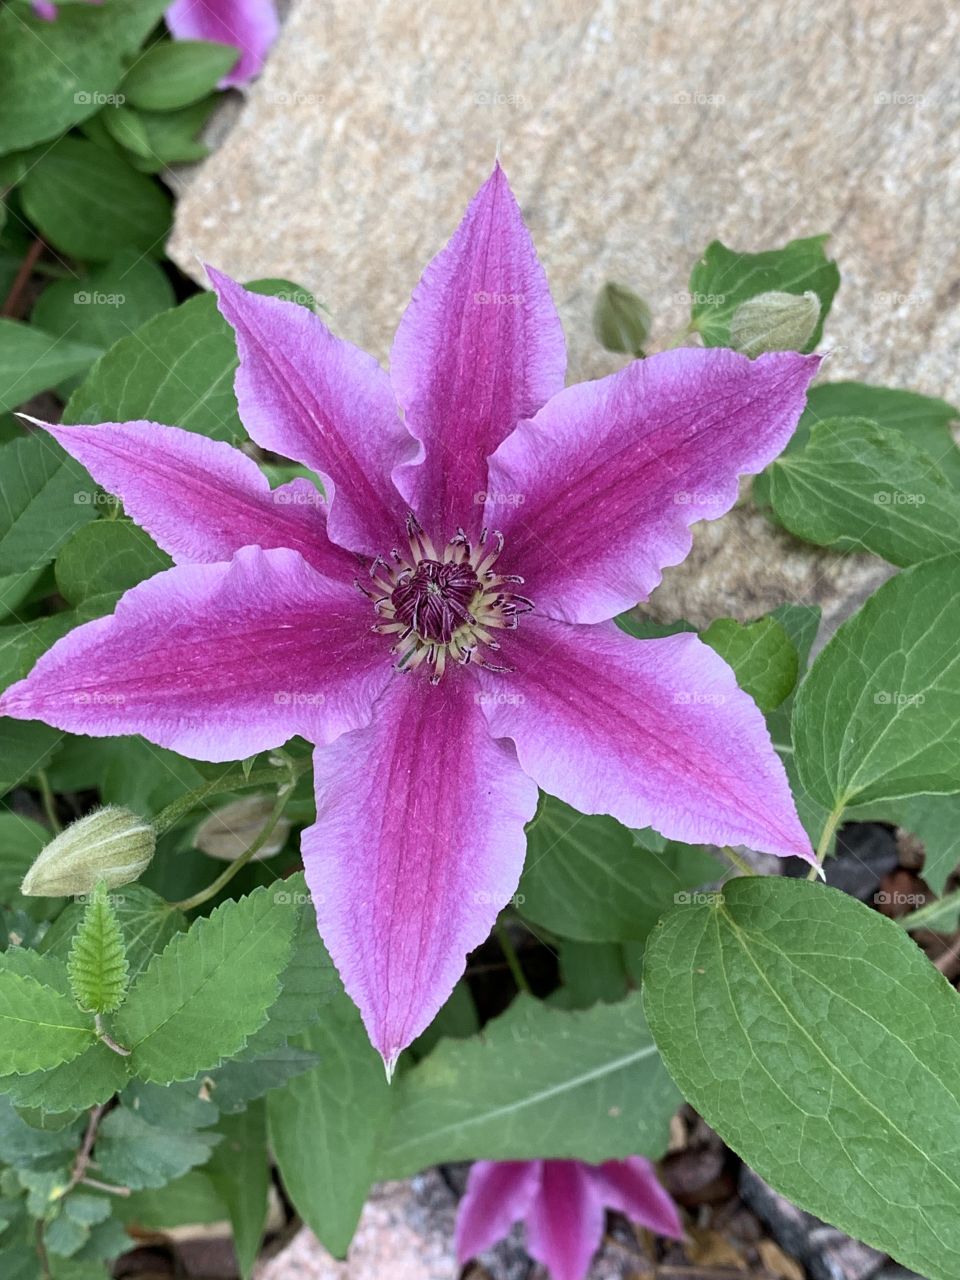 A beautiful, vivid clematis bloom. Striped purple petals with lovely green foliage.